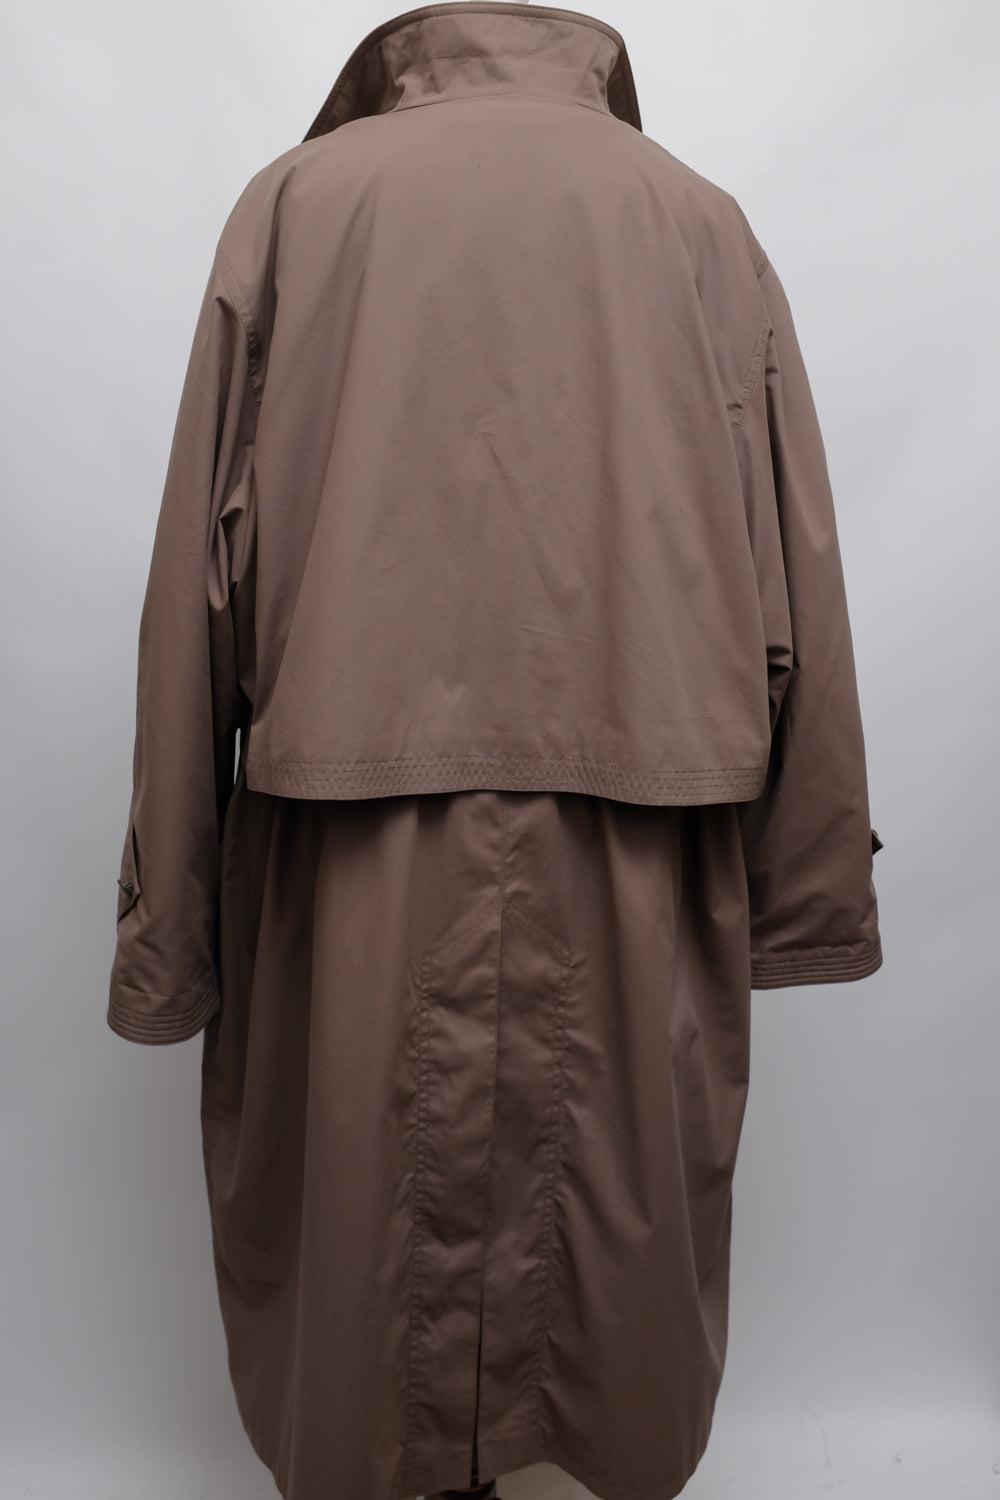 ALL SEASON BROWN VINTAGE TRENCH